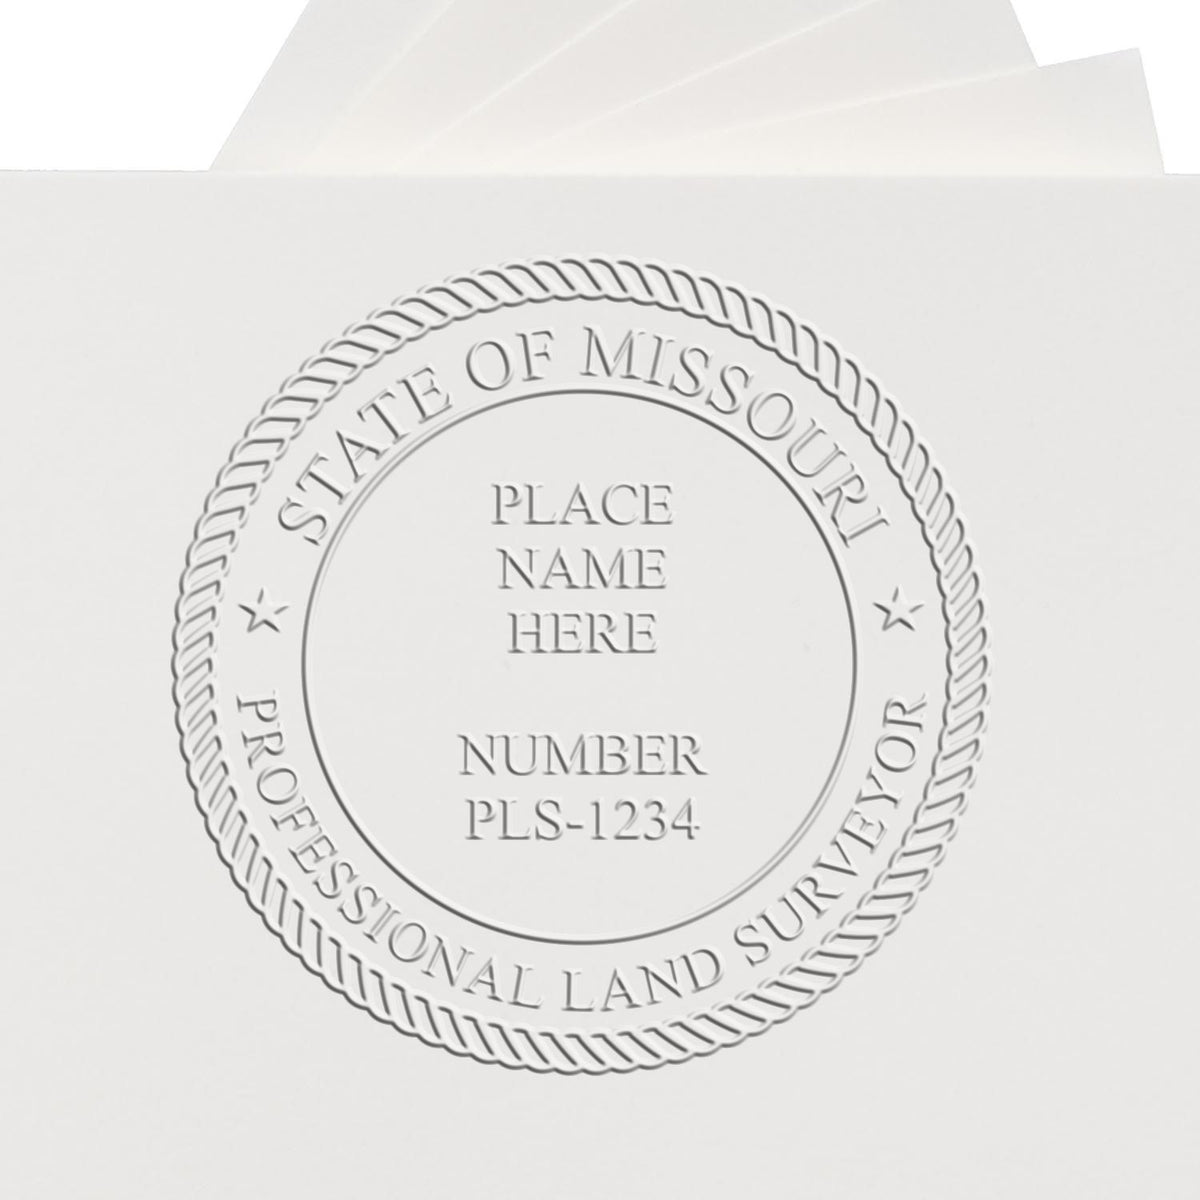 A stamped imprint of the Gift Missouri Land Surveyor Seal in this stylish lifestyle photo, setting the tone for a unique and personalized product.